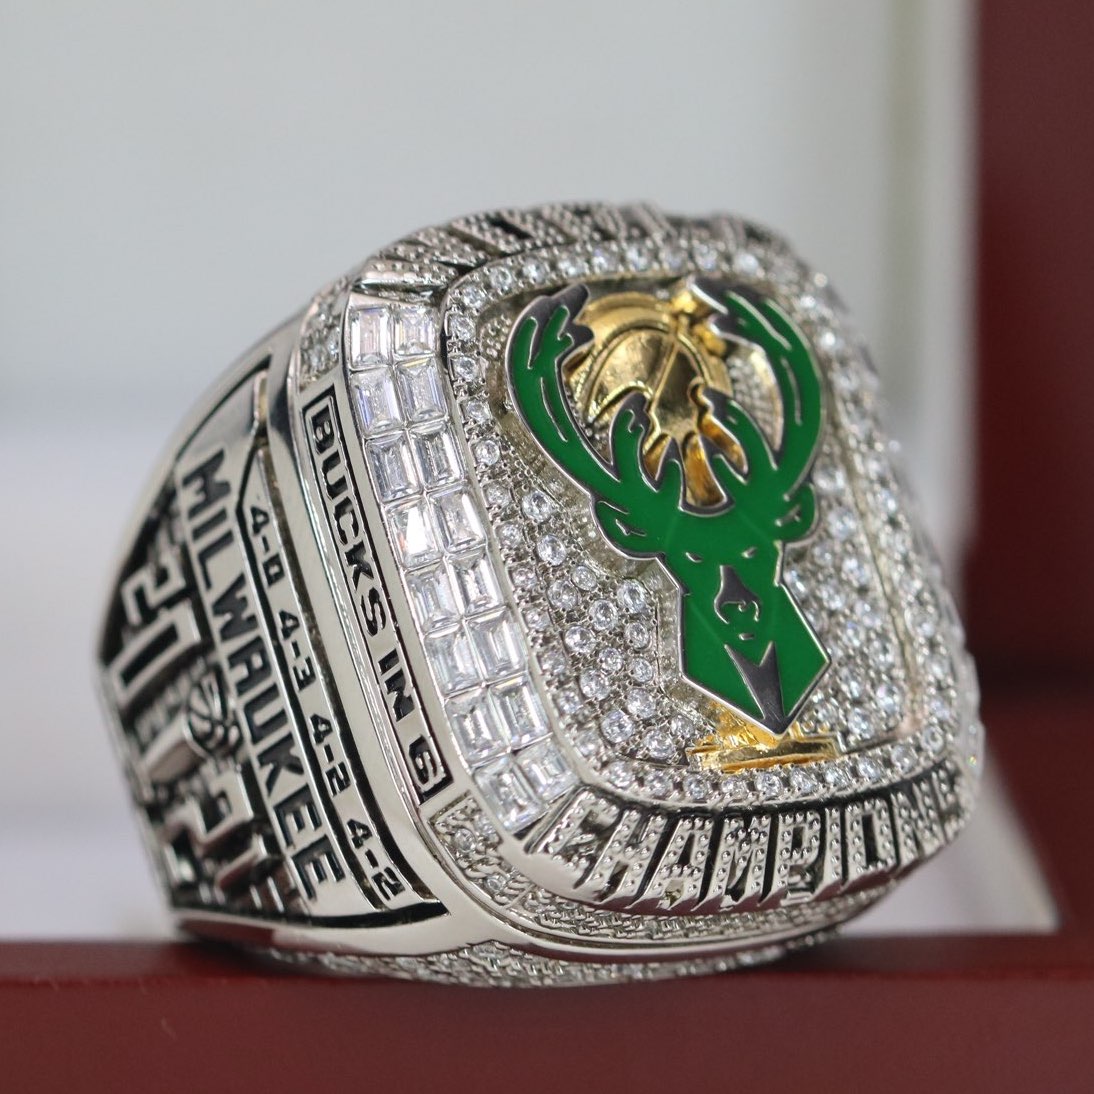 Bucks receive championship rings, rout Nets in opener